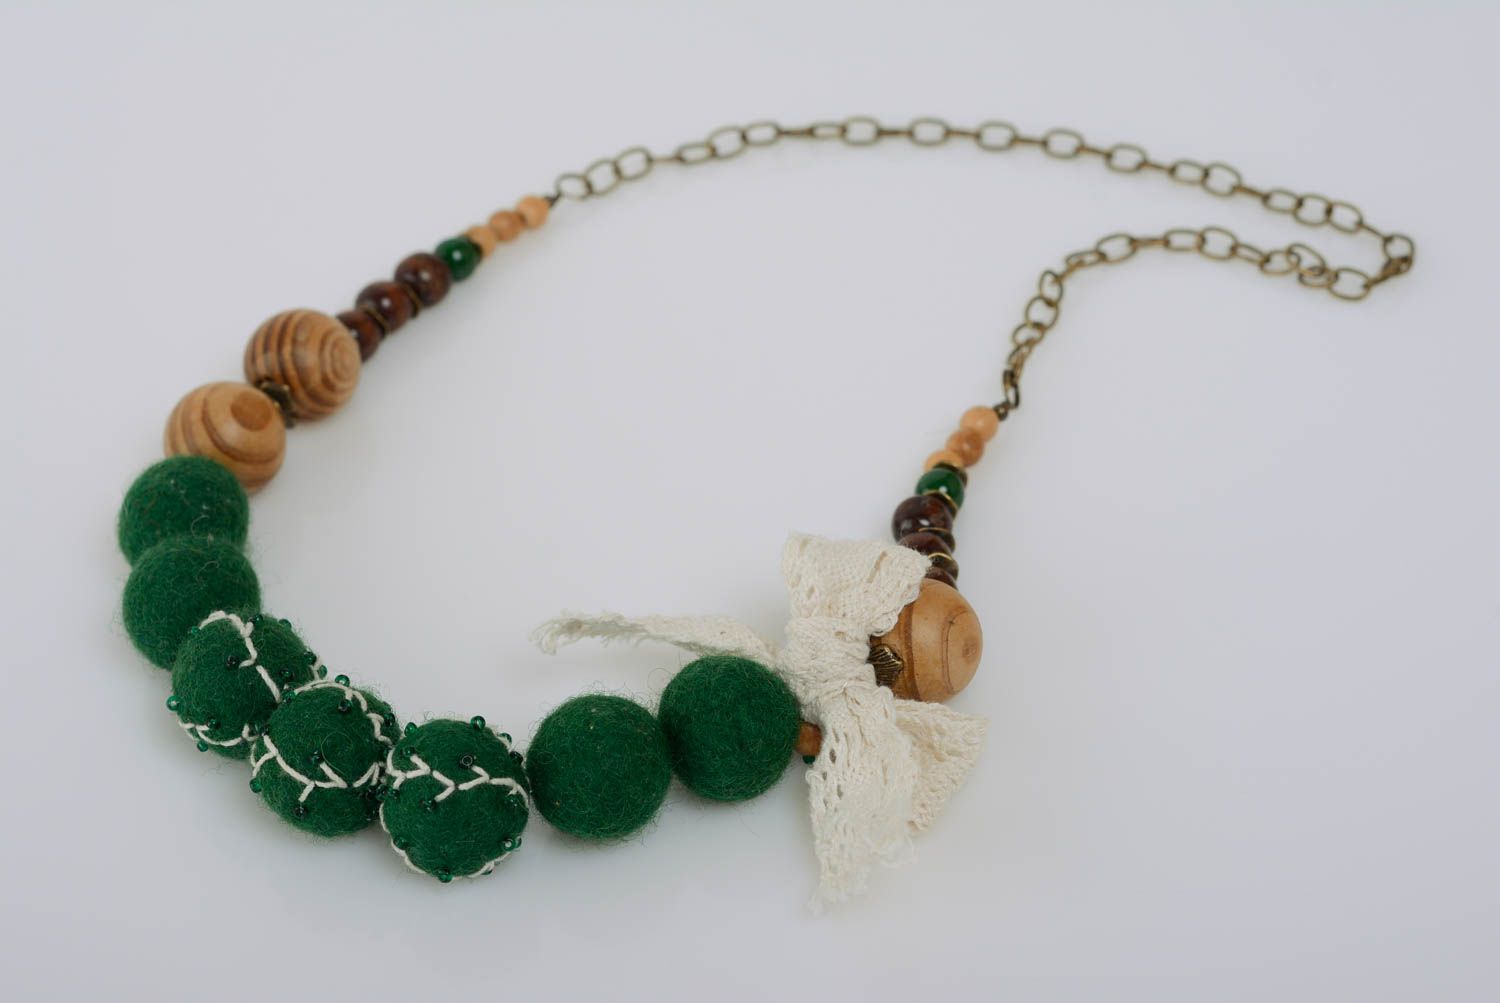 Handmade necklace on chain with green felted wool and wooden beads with lace photo 1